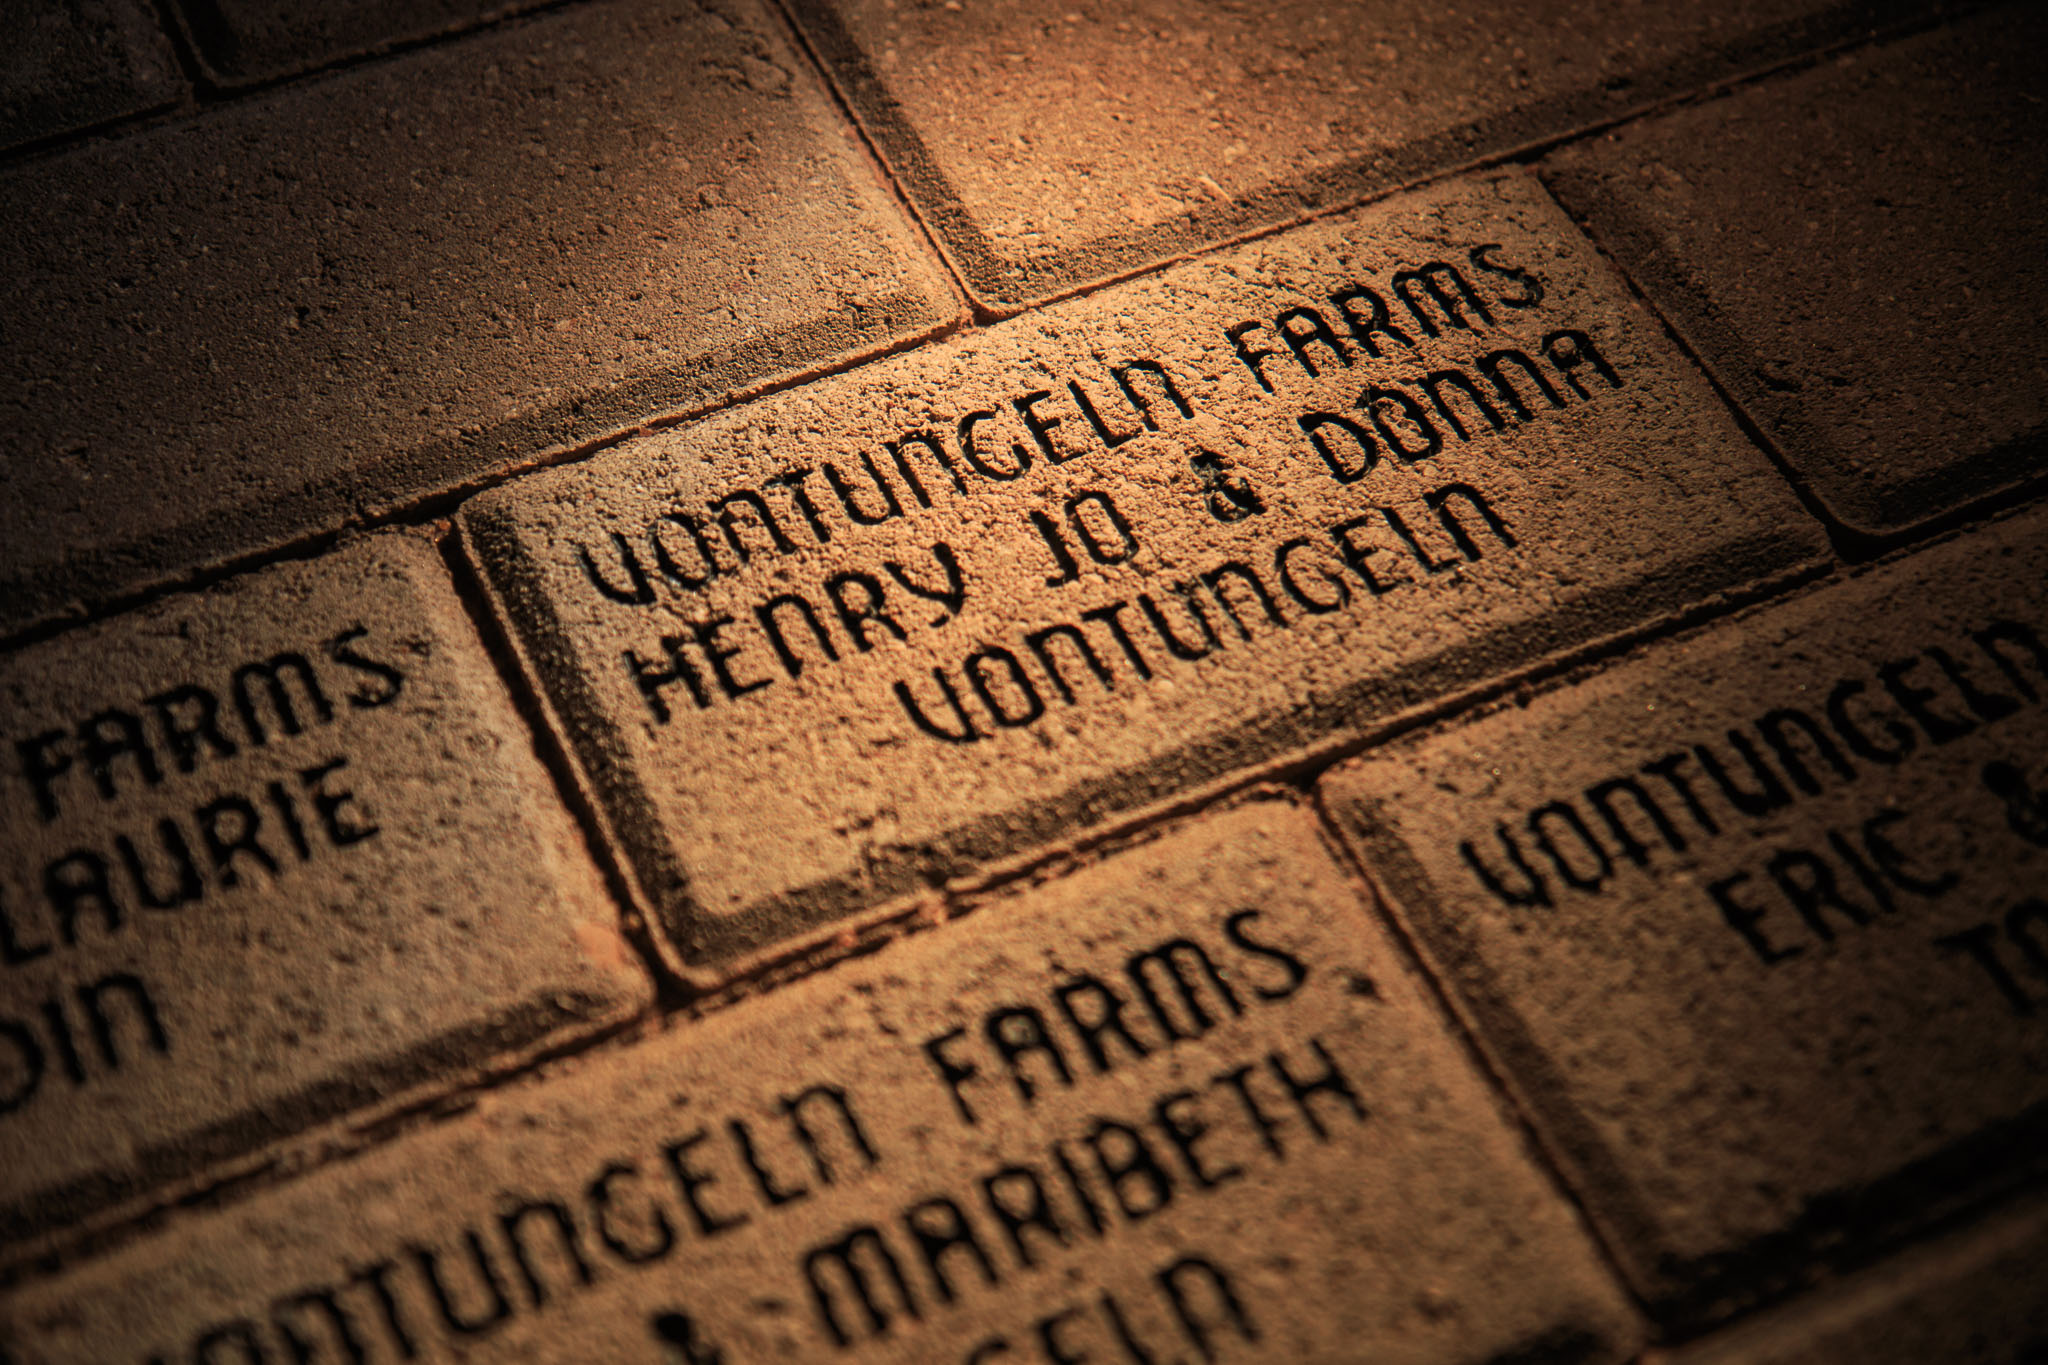 Brick pavers in the OKFB commemorative courtyard